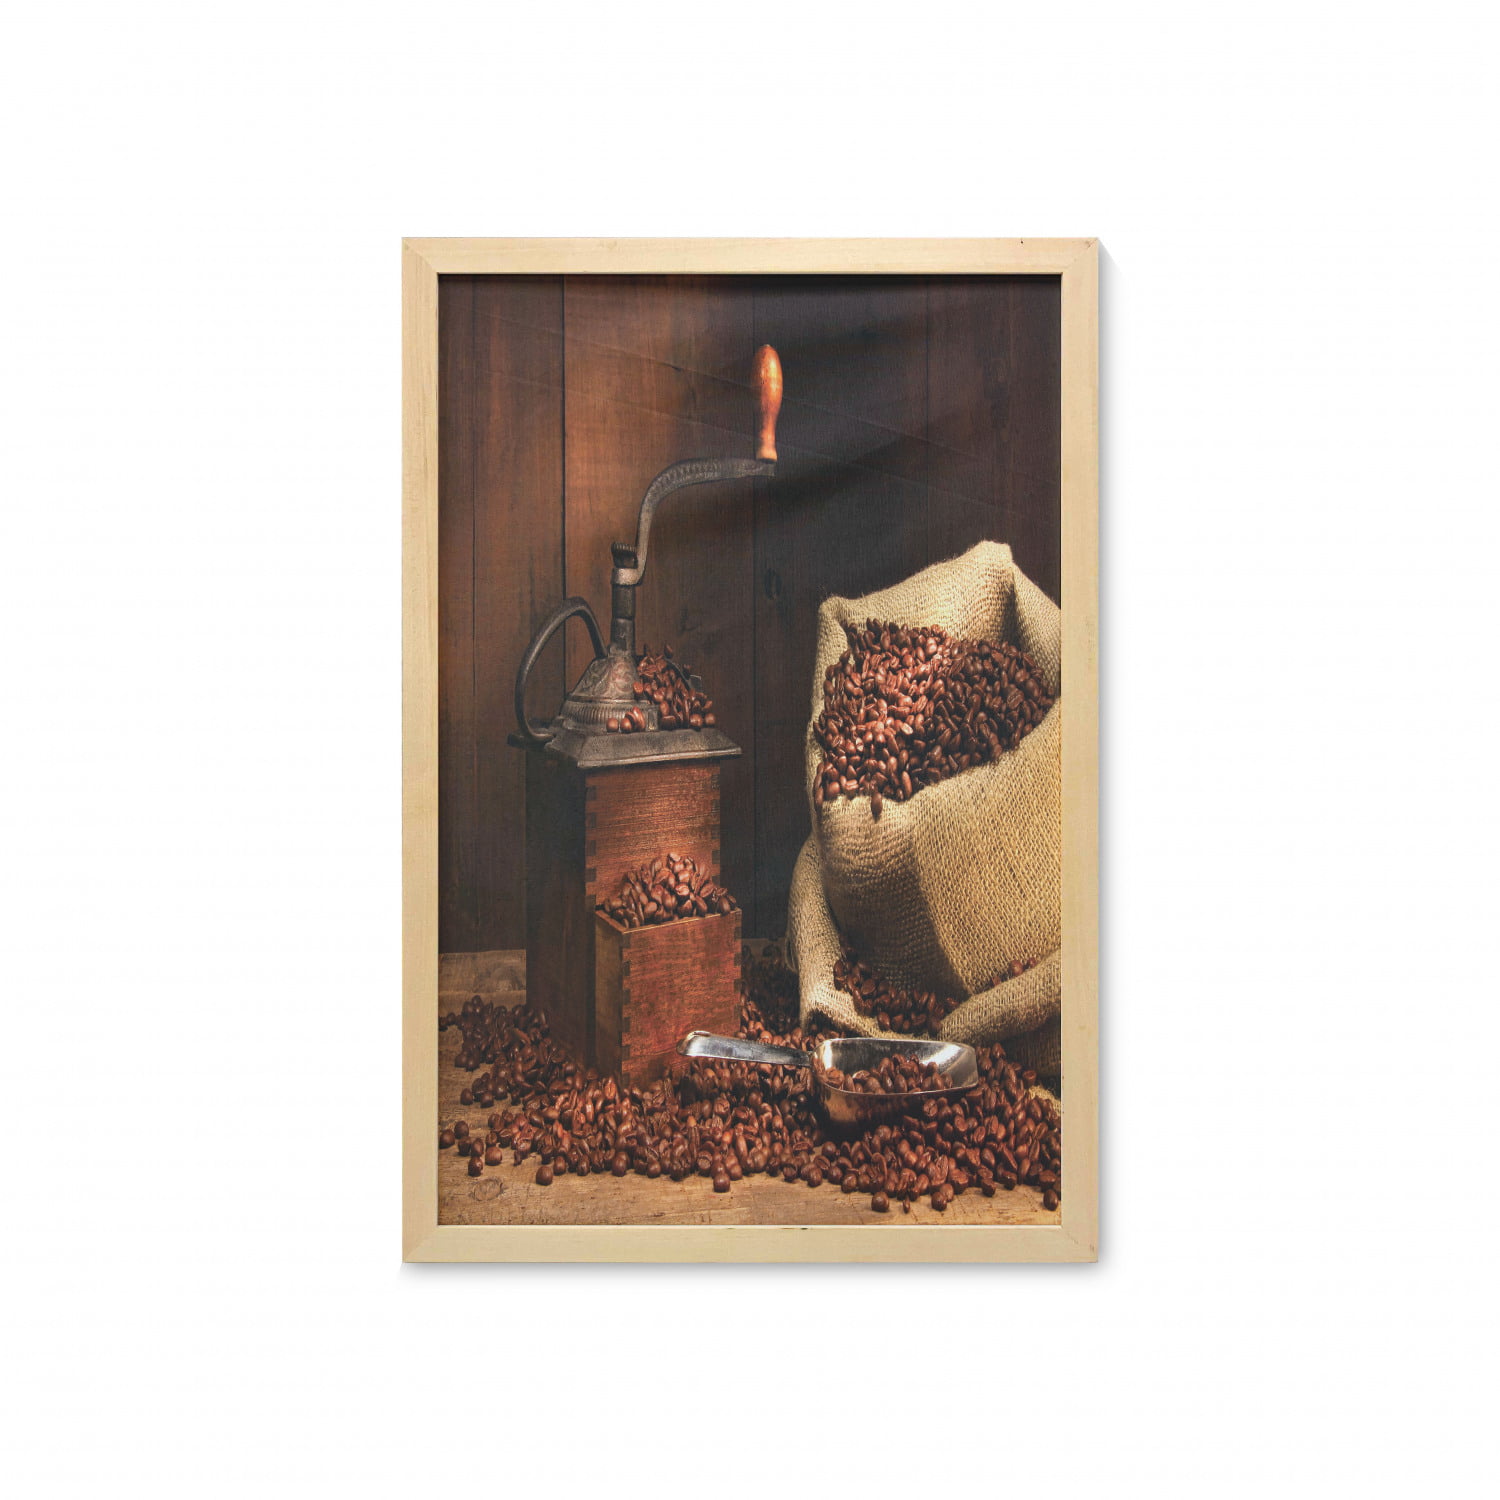 old coffee grinder with coffee beans, Posters, Art Prints, Wall Murals